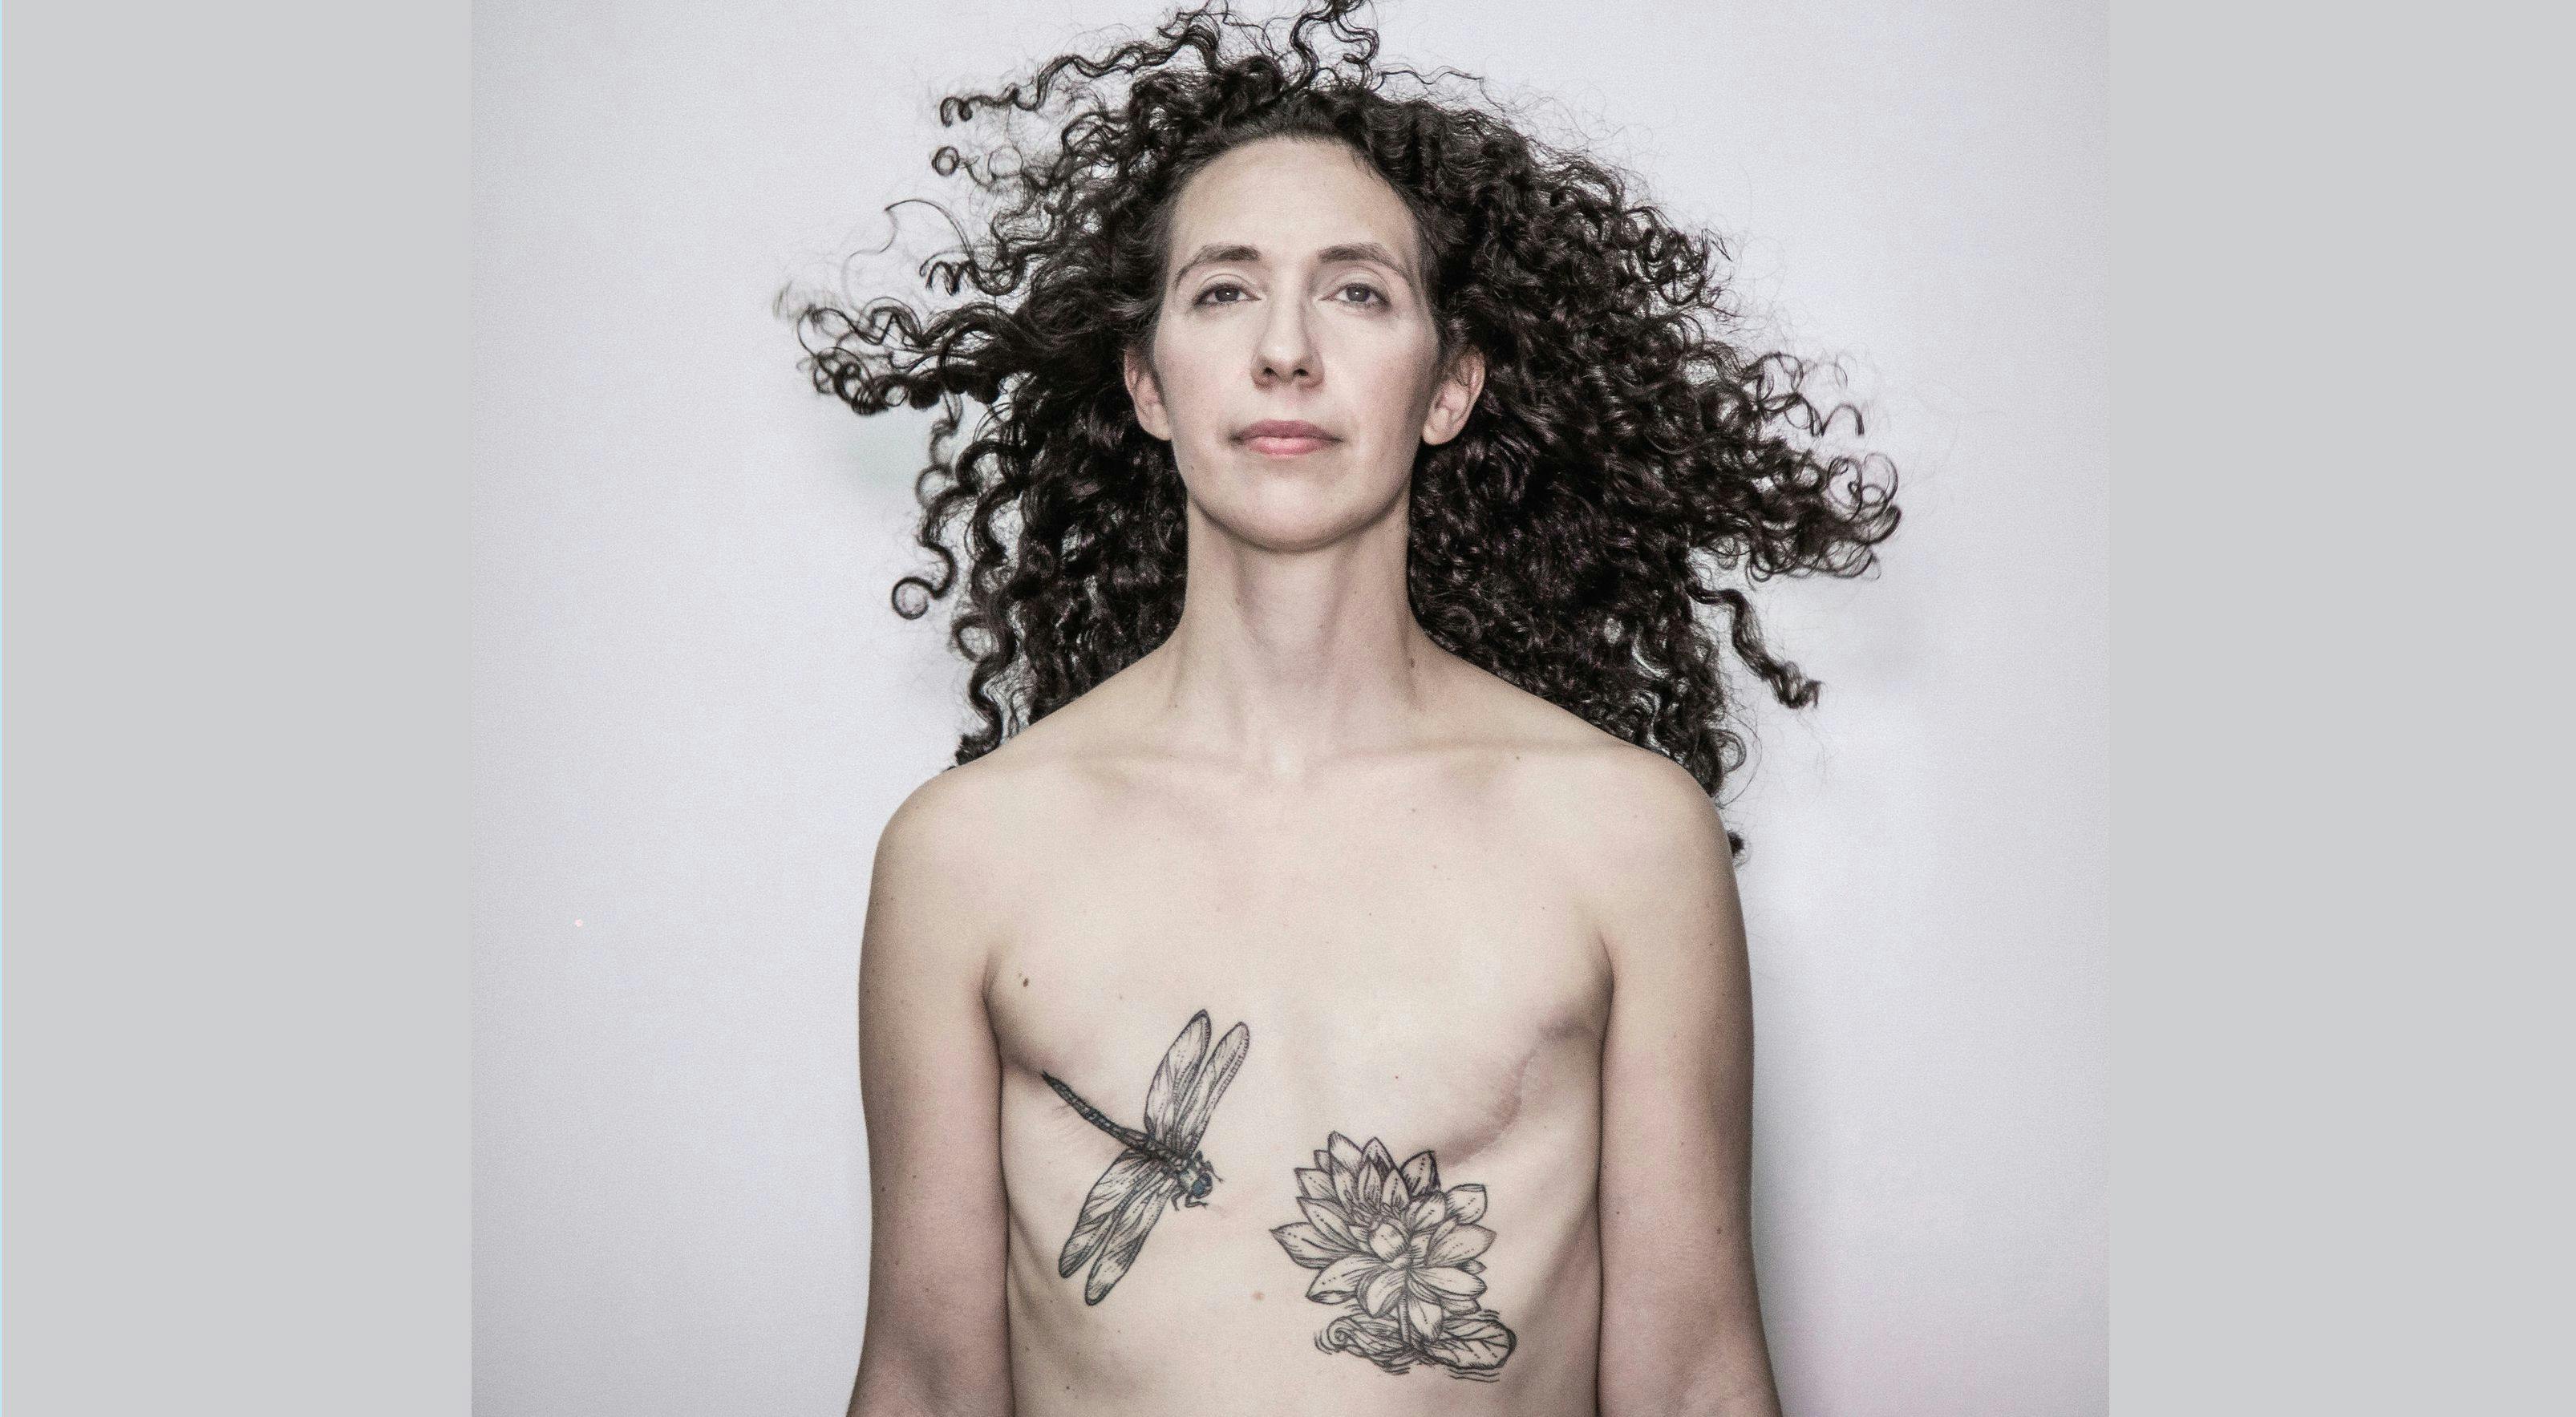 REBECCA PINE
gained a sense of
control when she
got decorative
tattoos on her
chest after a bilateral
mastectomy. - BEATRICE DE GEA